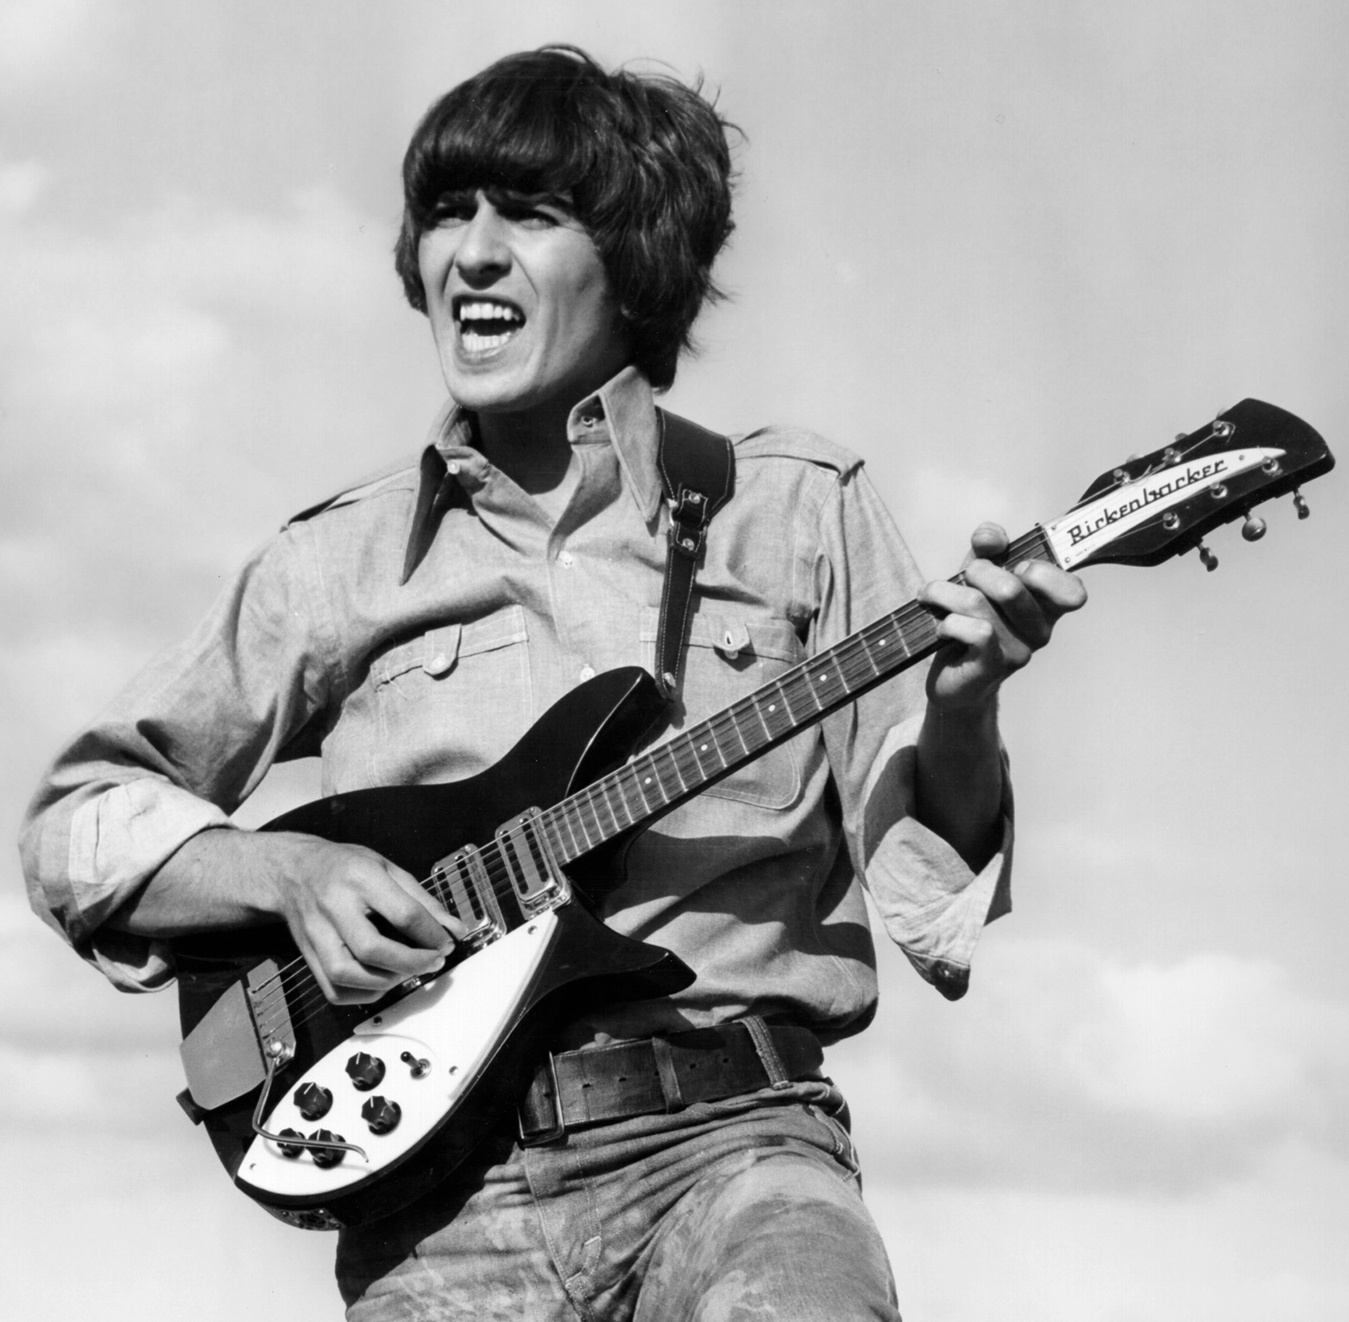 George Harrison playing the guitar